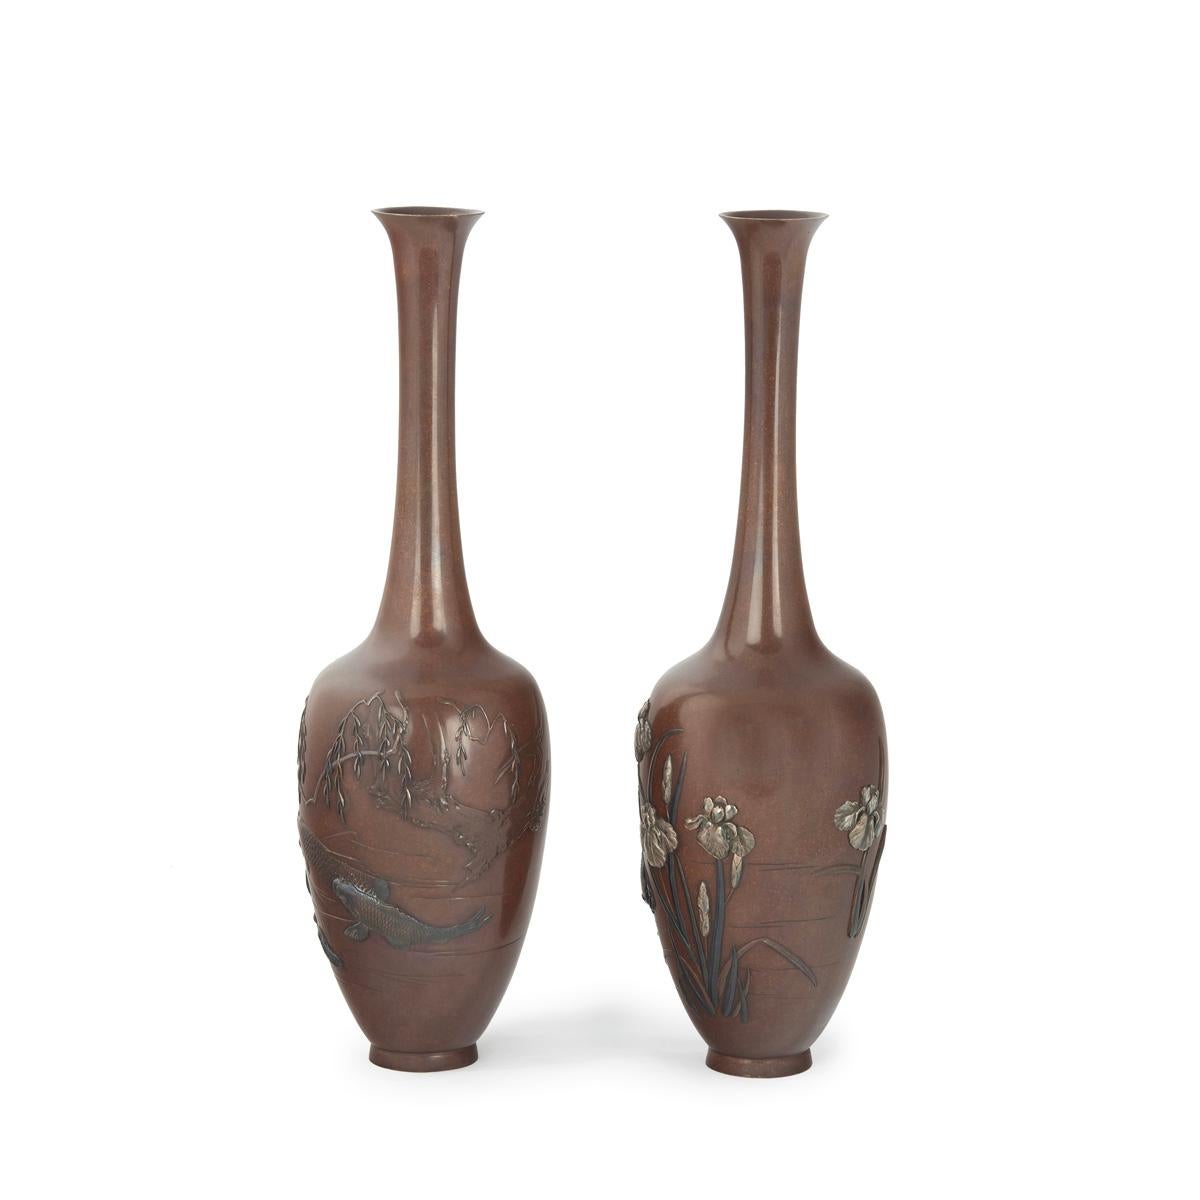 A pair of fine Meiji period bronze vases by Hidenobu In Good Condition For Sale In Lymington, Hampshire